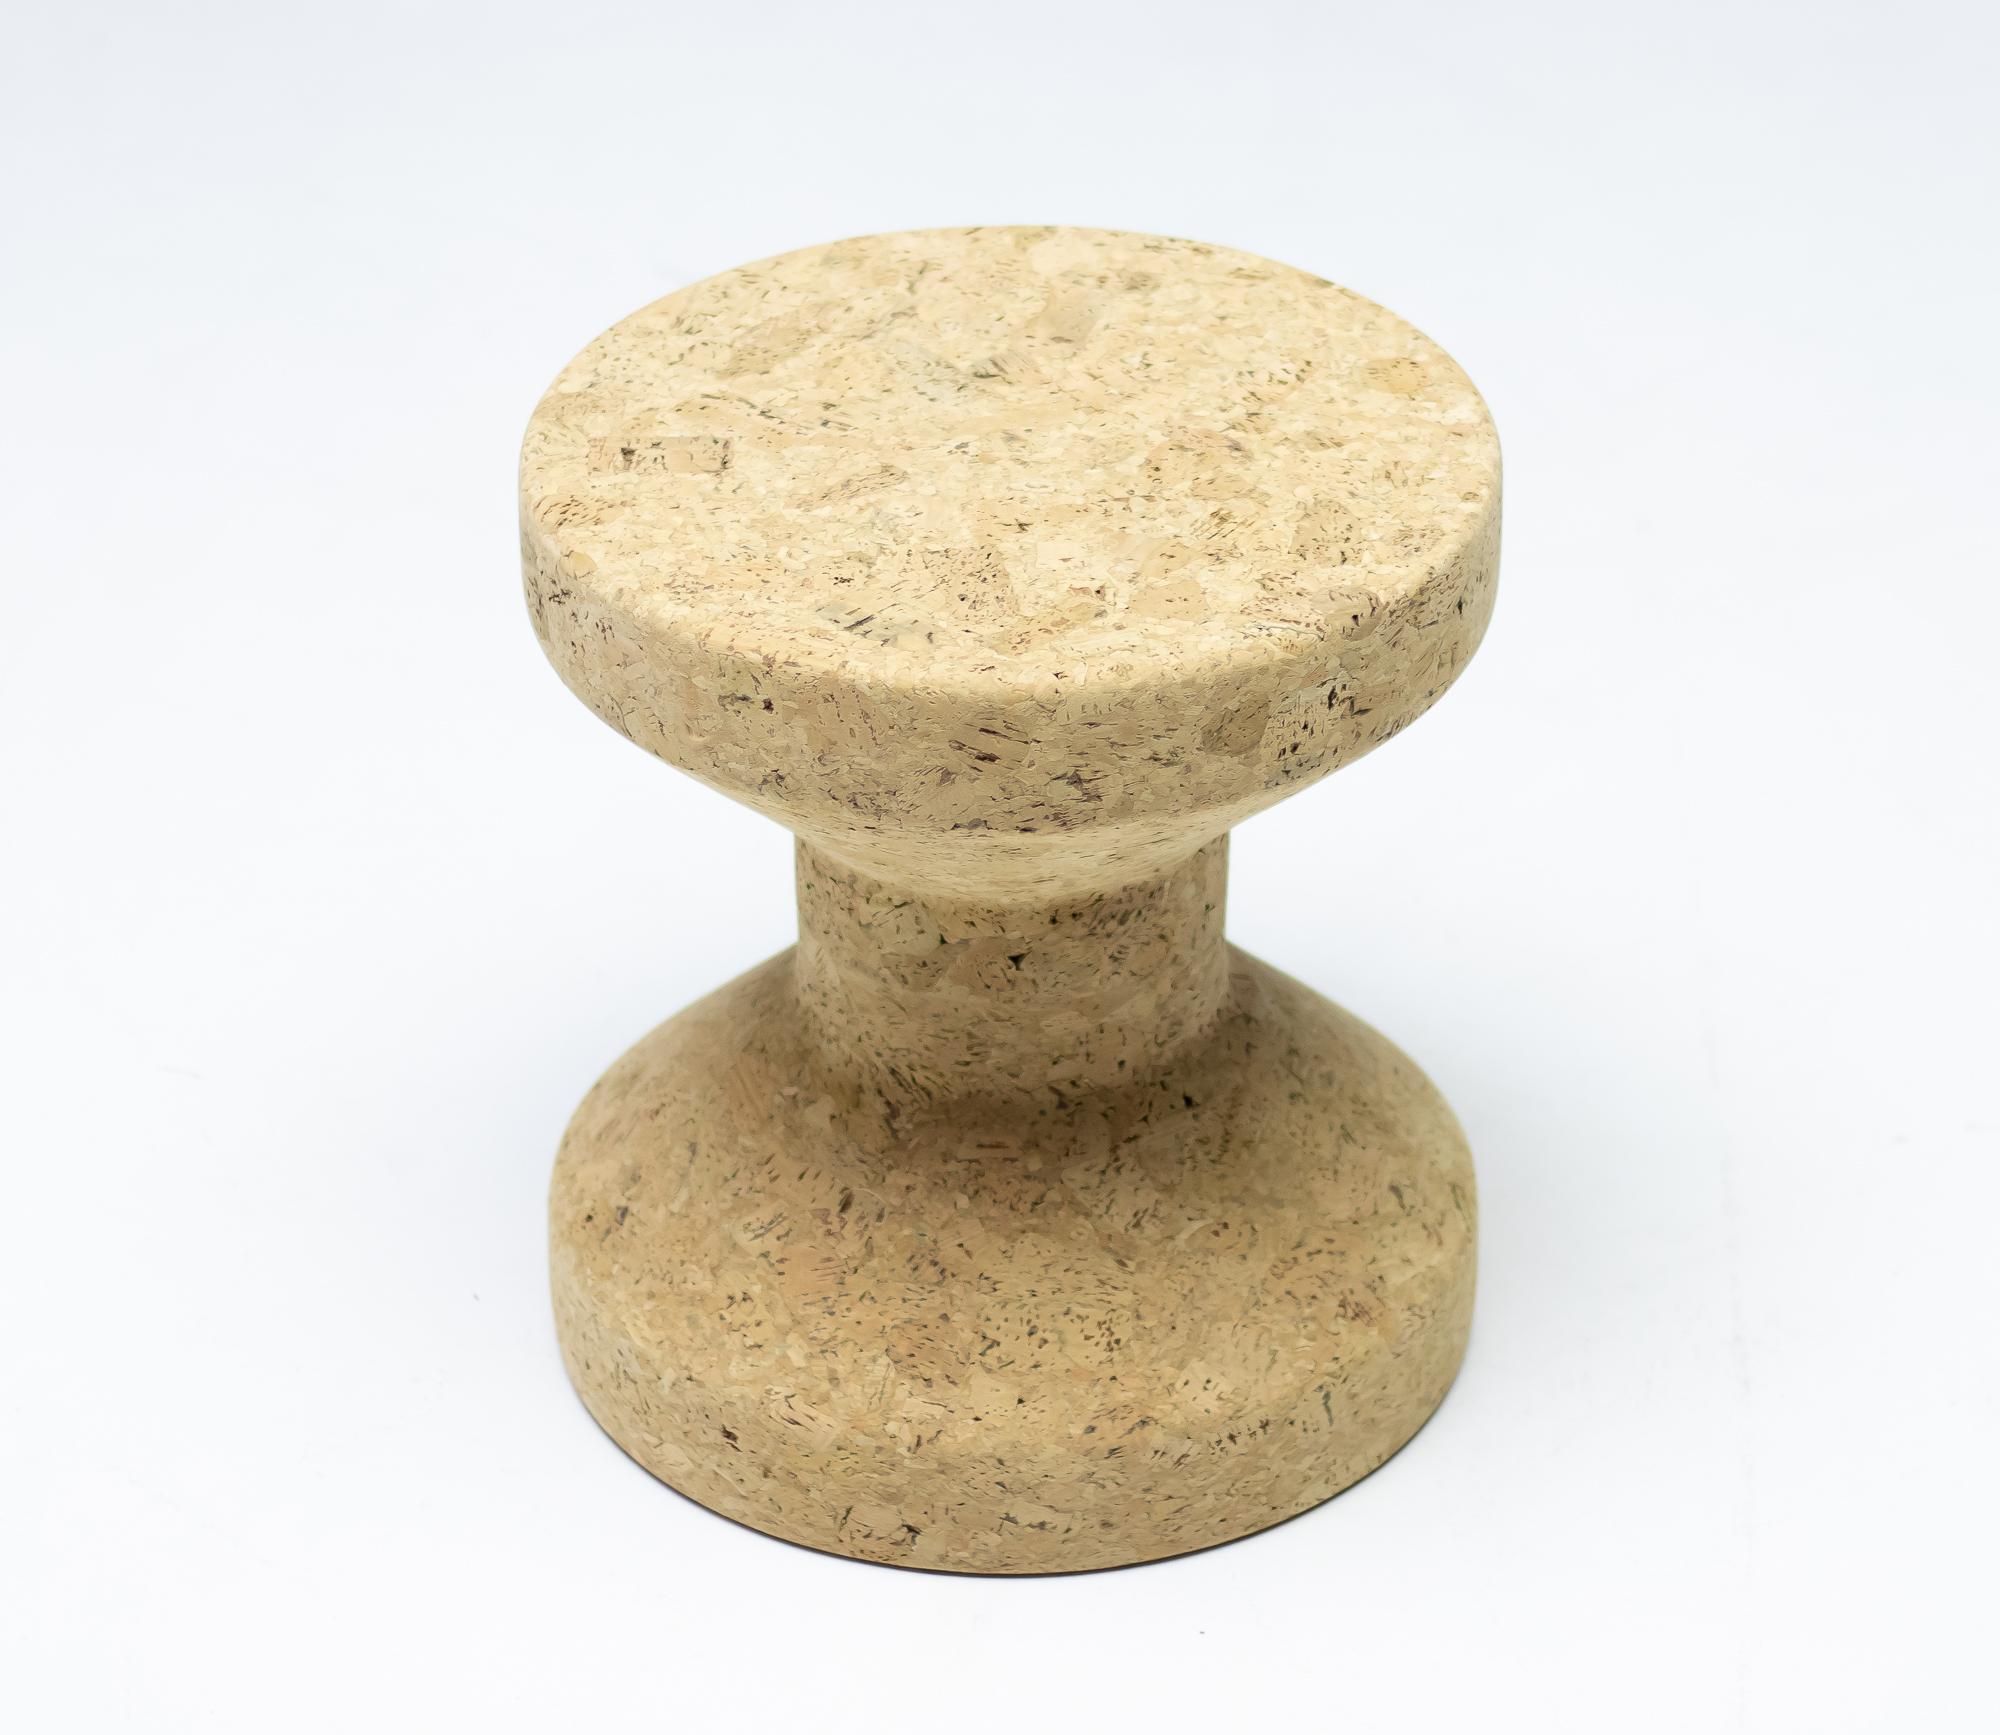 Stabile and robust, this stool or side table of the Cork Family by Jasper Morrison exploit the advantageous natural properties of cork: it is comparatively lightweight and extremely durable with a pleasant velvety feel. 
Material: solid turned